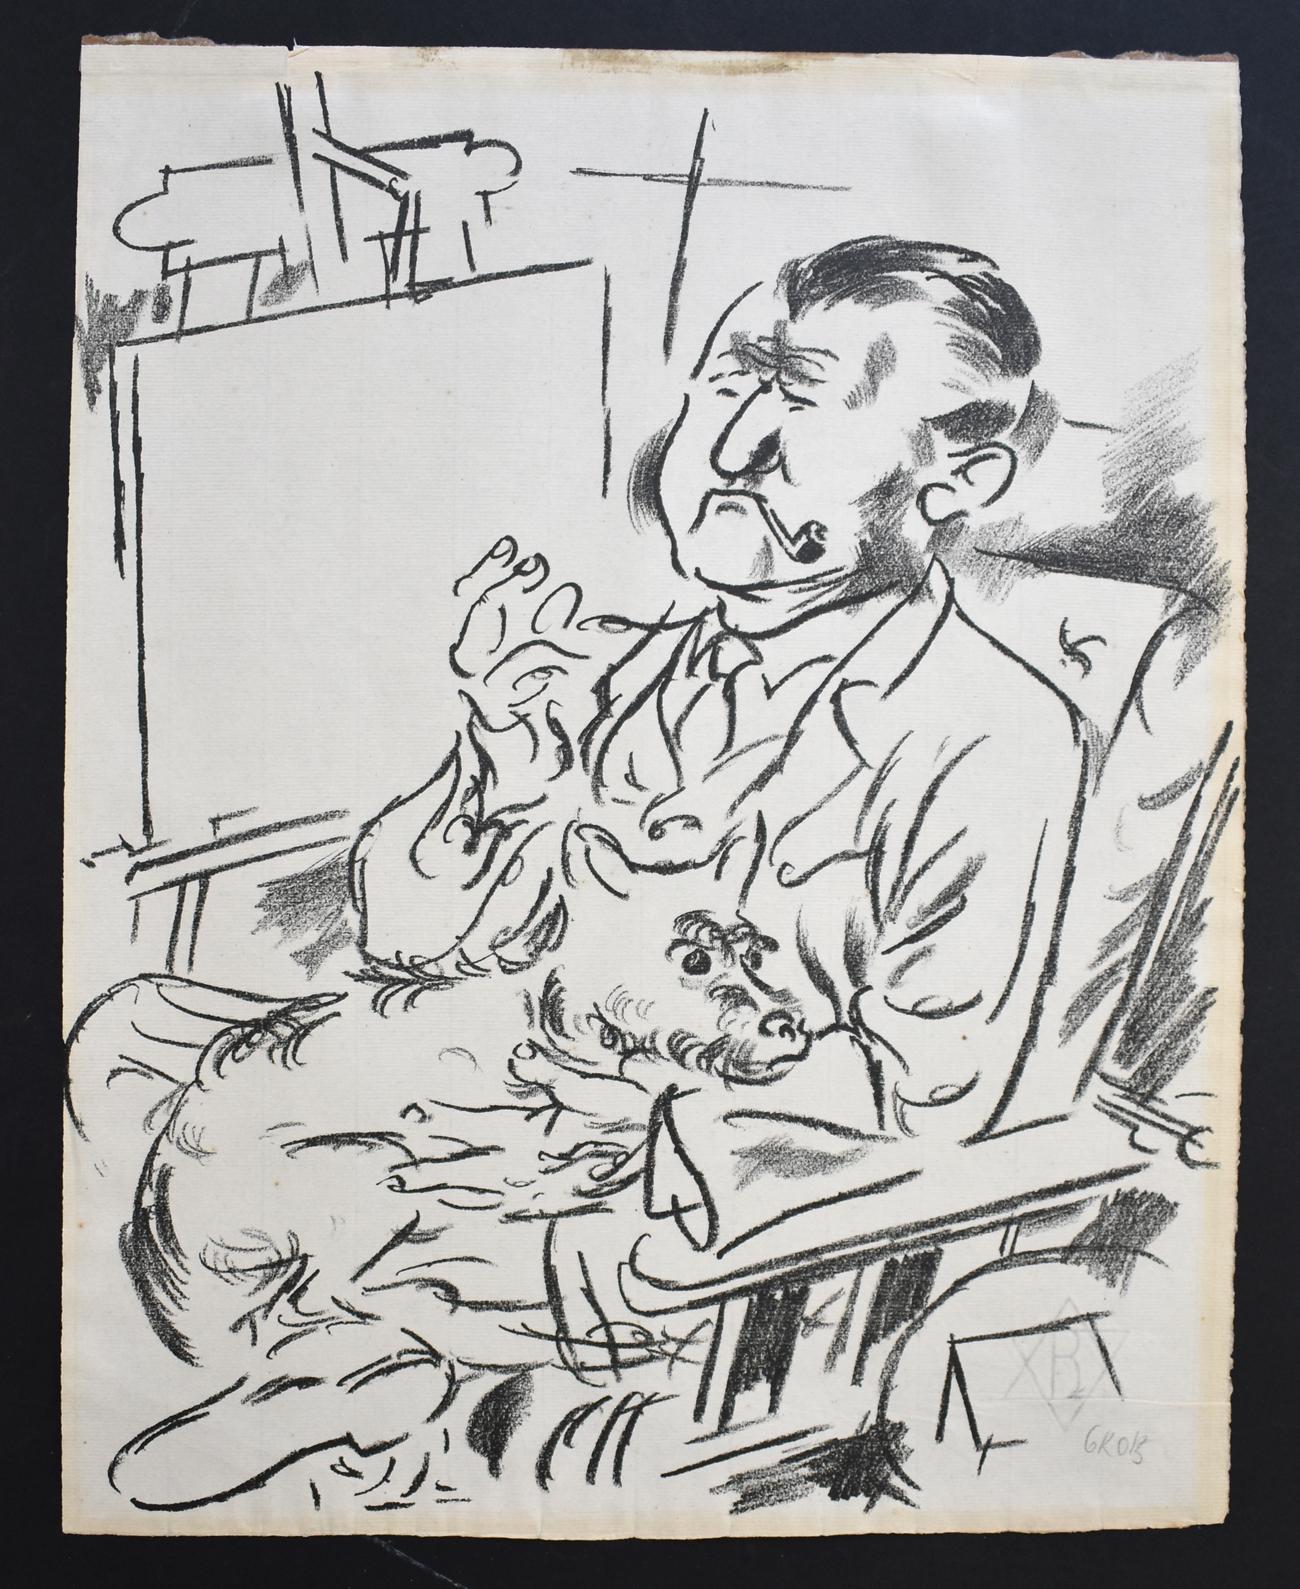  Self-Portrait with Dog in Front of the Easel, from: The Creators - German Art - Print by George Grosz